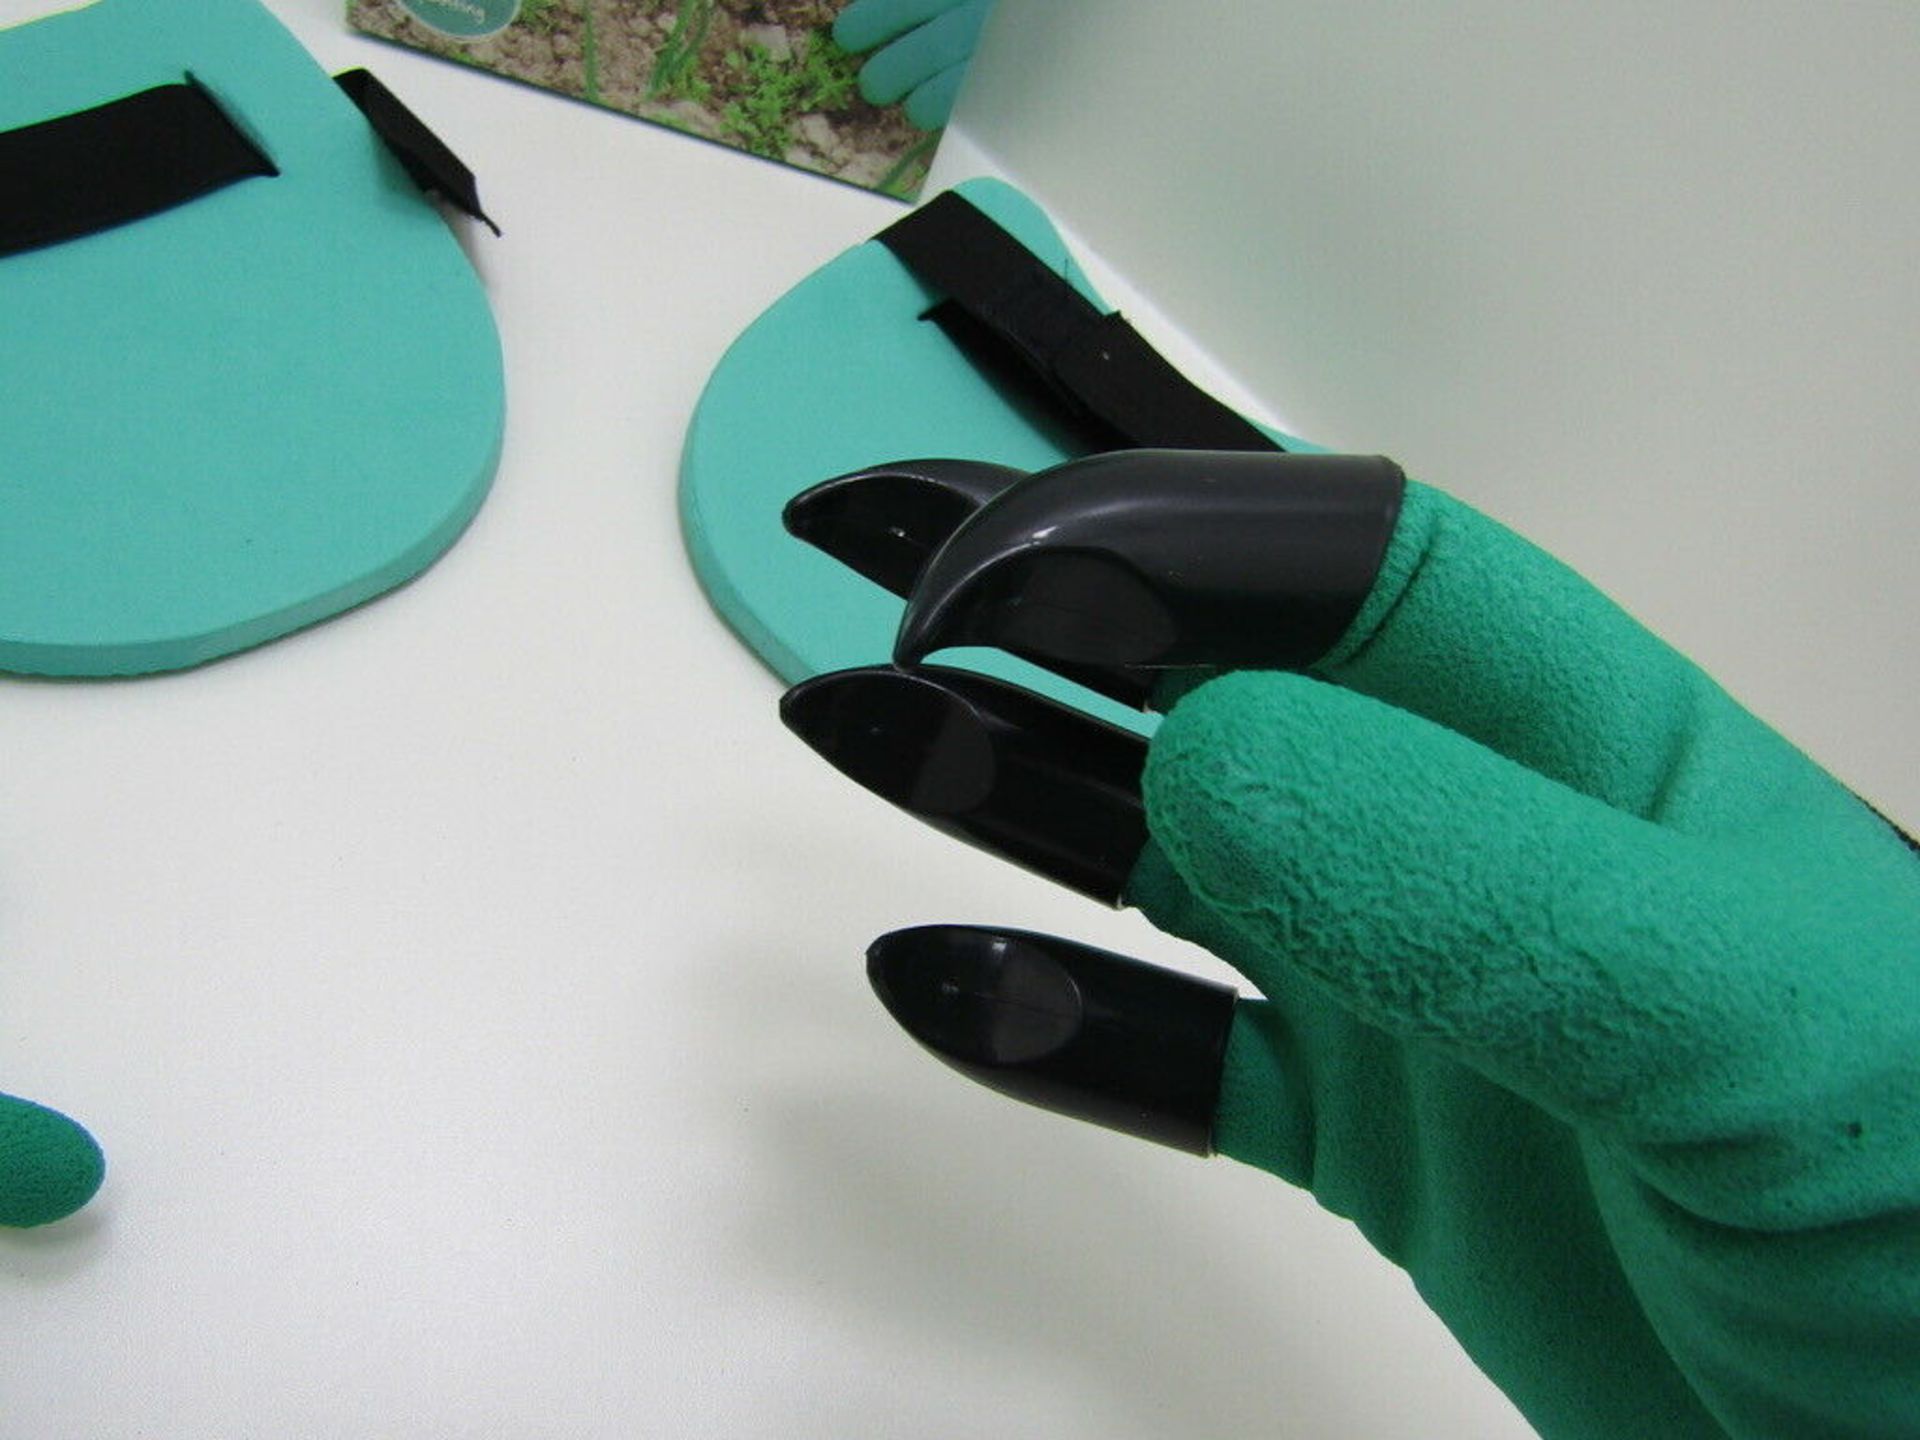 4x Digging Gloves. Gardeners Claw Finger Gloves and Knee Pad Set. - Image 5 of 8